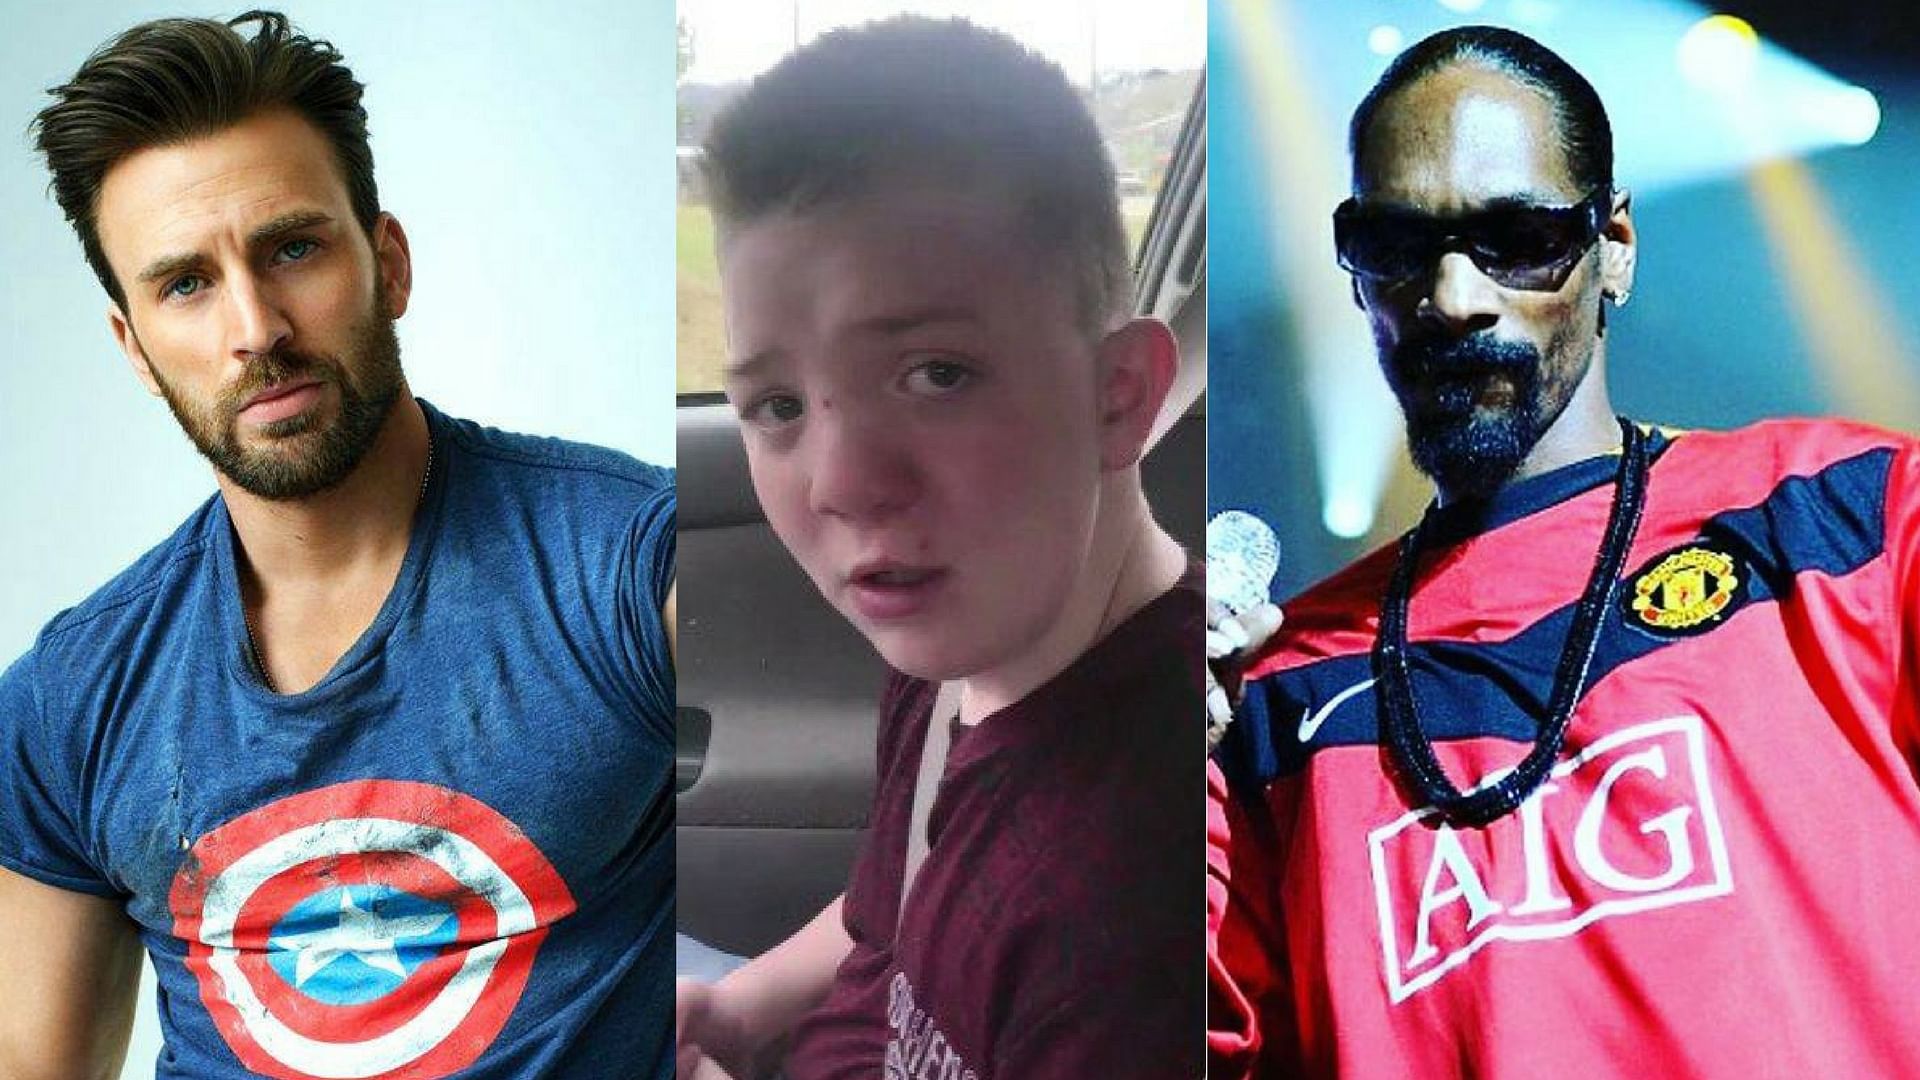 Chris Evans and Snoop Dogg are among celebrities who are rallying around in support for Keaton Jones (middle).